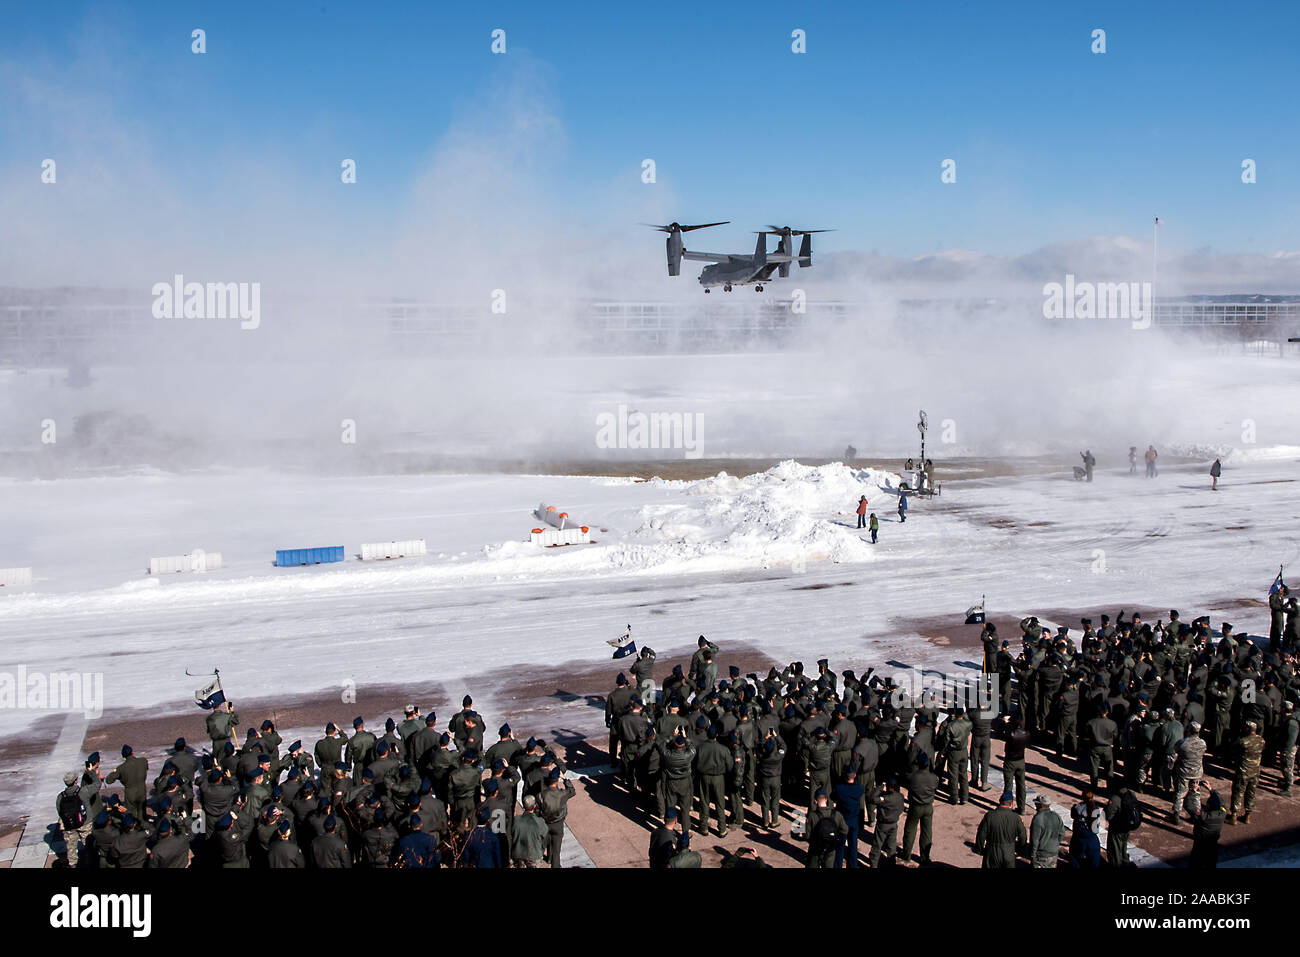 U.S. AIR FORCE ACADEMY, Colo. – A CV-22 Osprey creates a small blizzard as it lands on the U.S. Air Force Academy Terrazzo on Nov. 1, 2019 during an airpower demonstration. The demonstration included an assortment of aircraft from fighter jets to helicopters, including a CV-22 Osprey. (U.S. Air Force photo/Trevor Cokley) Stock Photo